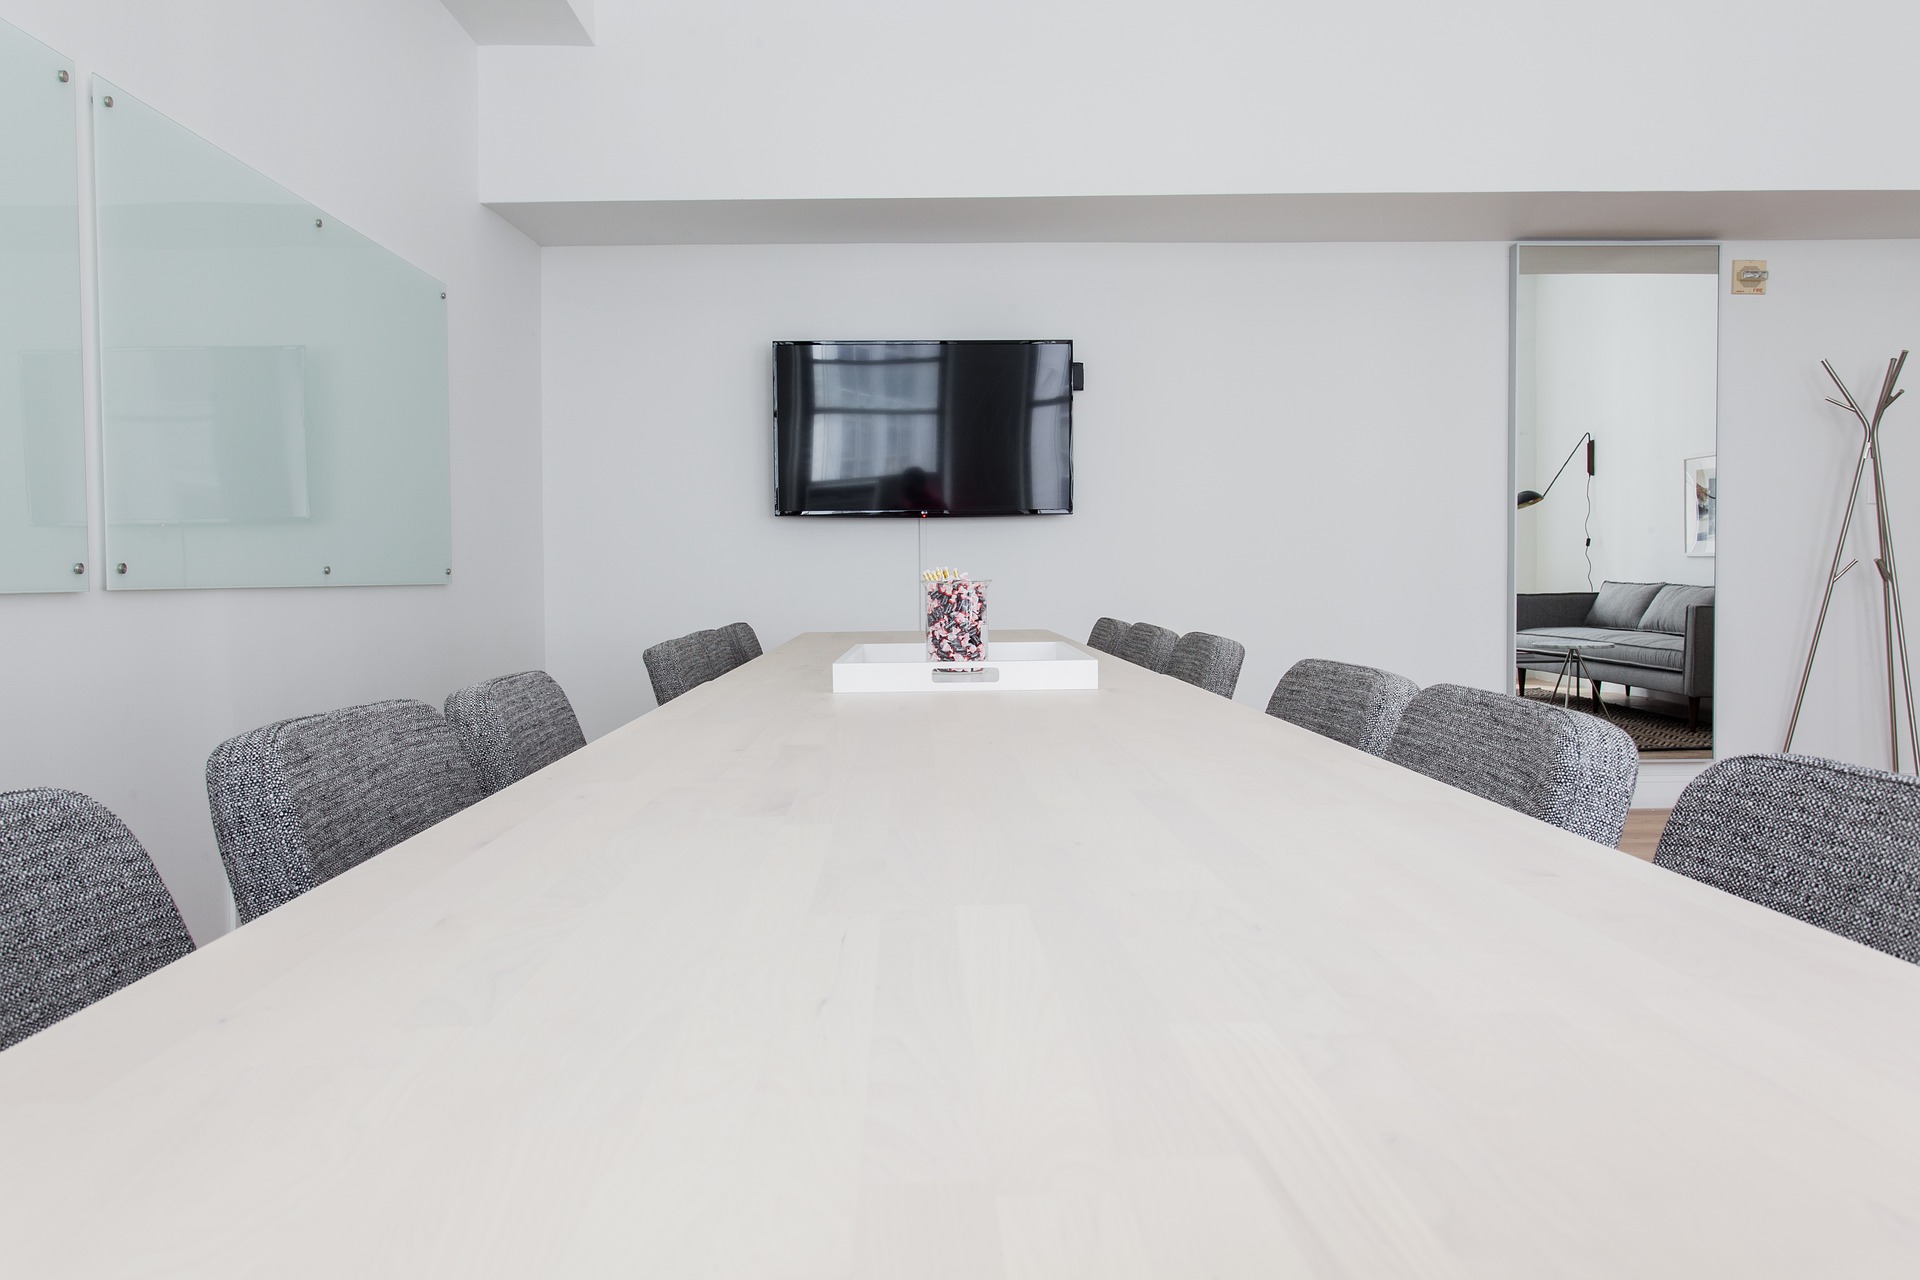 A meeting room with gray fabric chairs, a large conference table, and metal décor